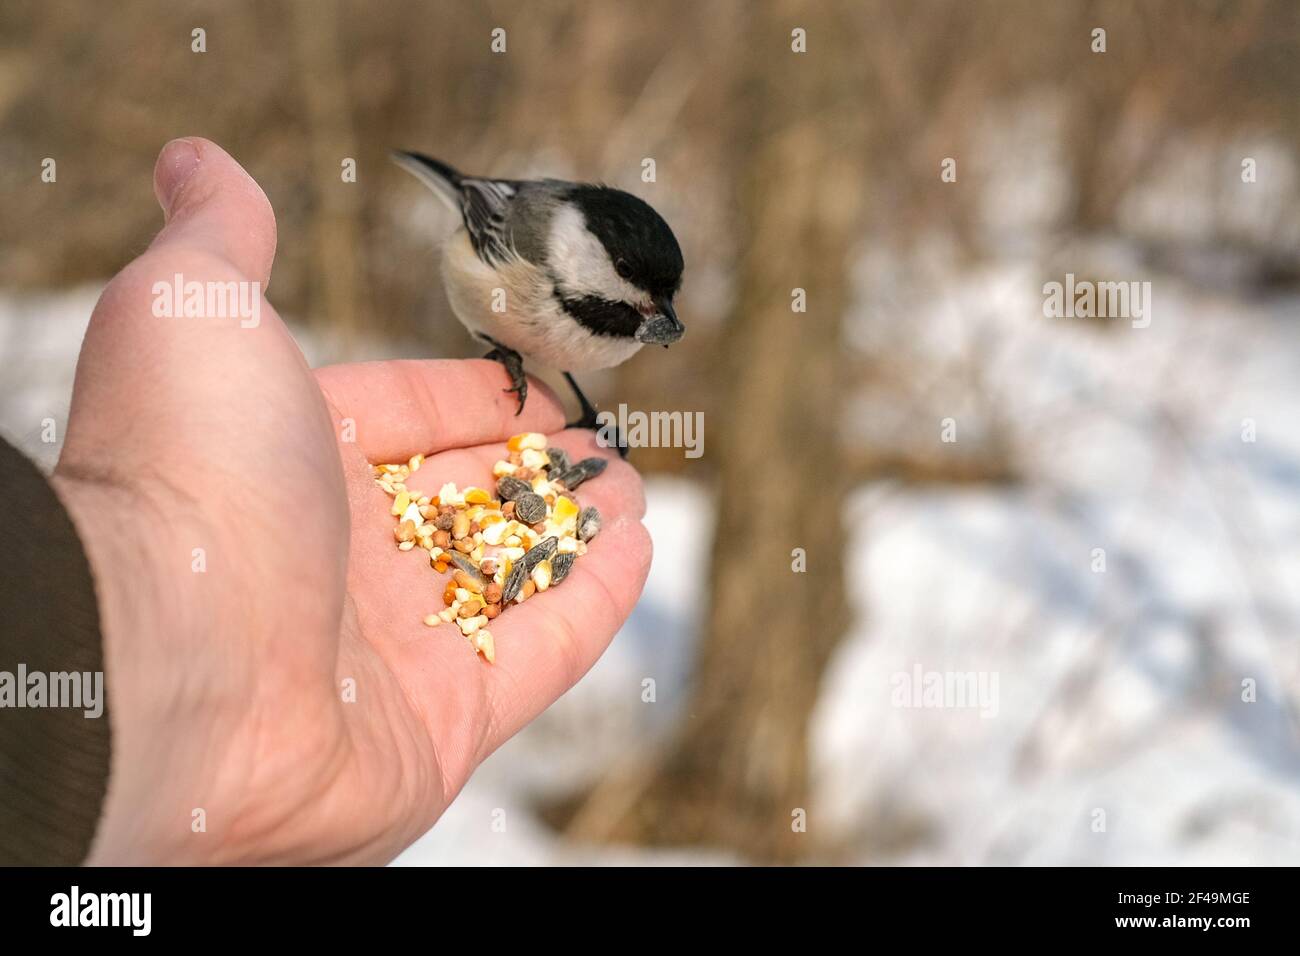 A black-capped chickadee picks up a sunflower seed with its beak while perched on a human hand. The hand offers birdseed to the wild bird. Stock Photo